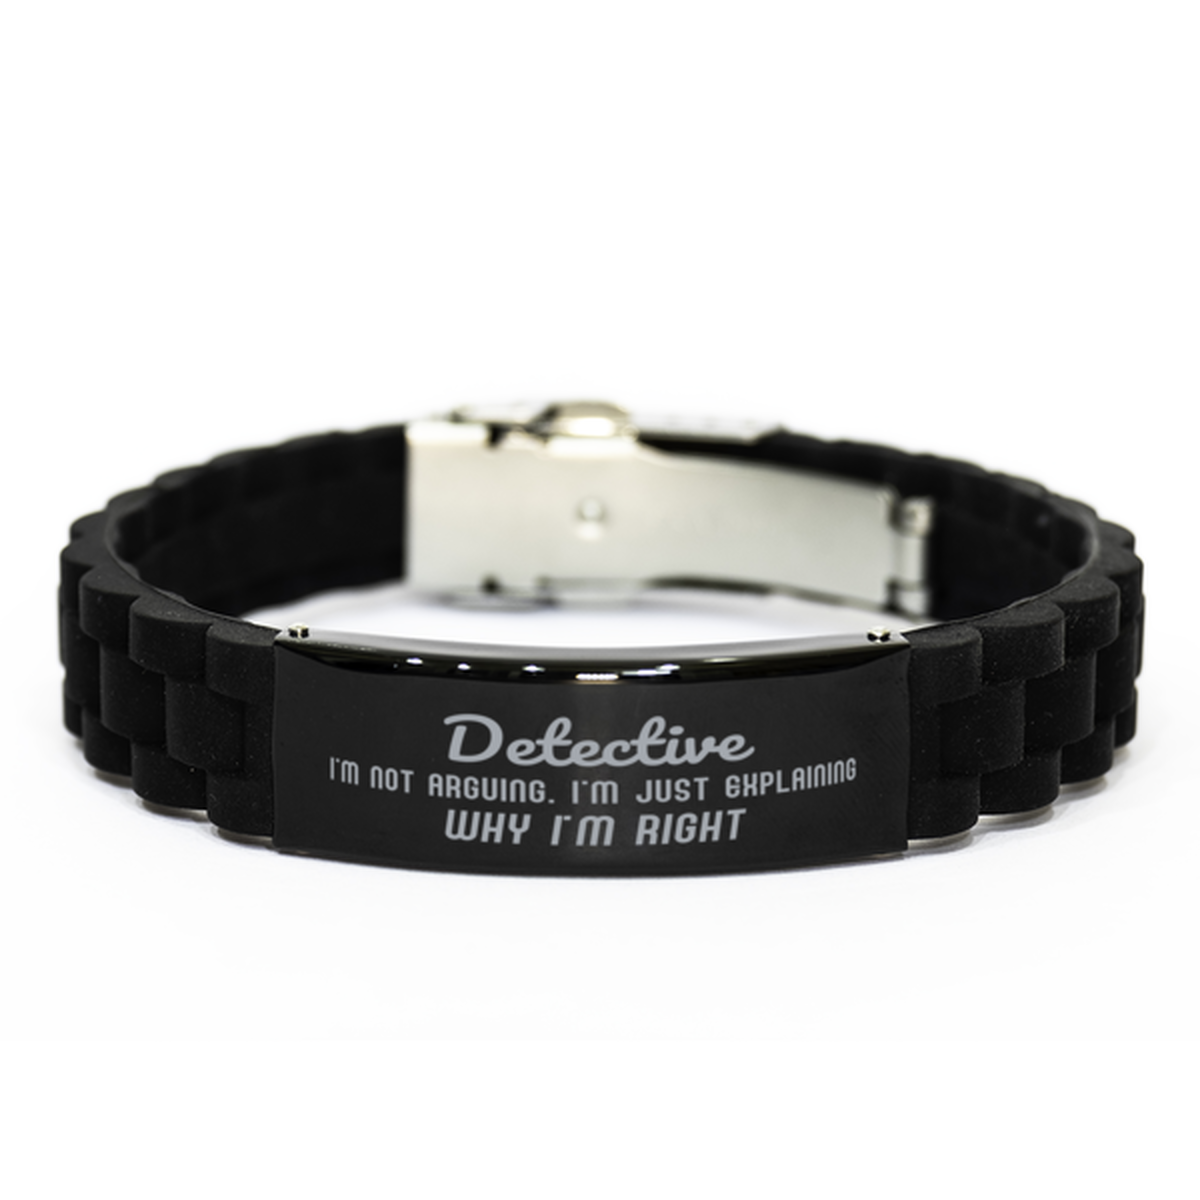 Detective I'm not Arguing. I'm Just Explaining Why I'm RIGHT Black Glidelock Clasp Bracelet, Funny Saying Quote Detective Gifts For Detective Graduation Birthday Christmas Gifts for Men Women Coworker